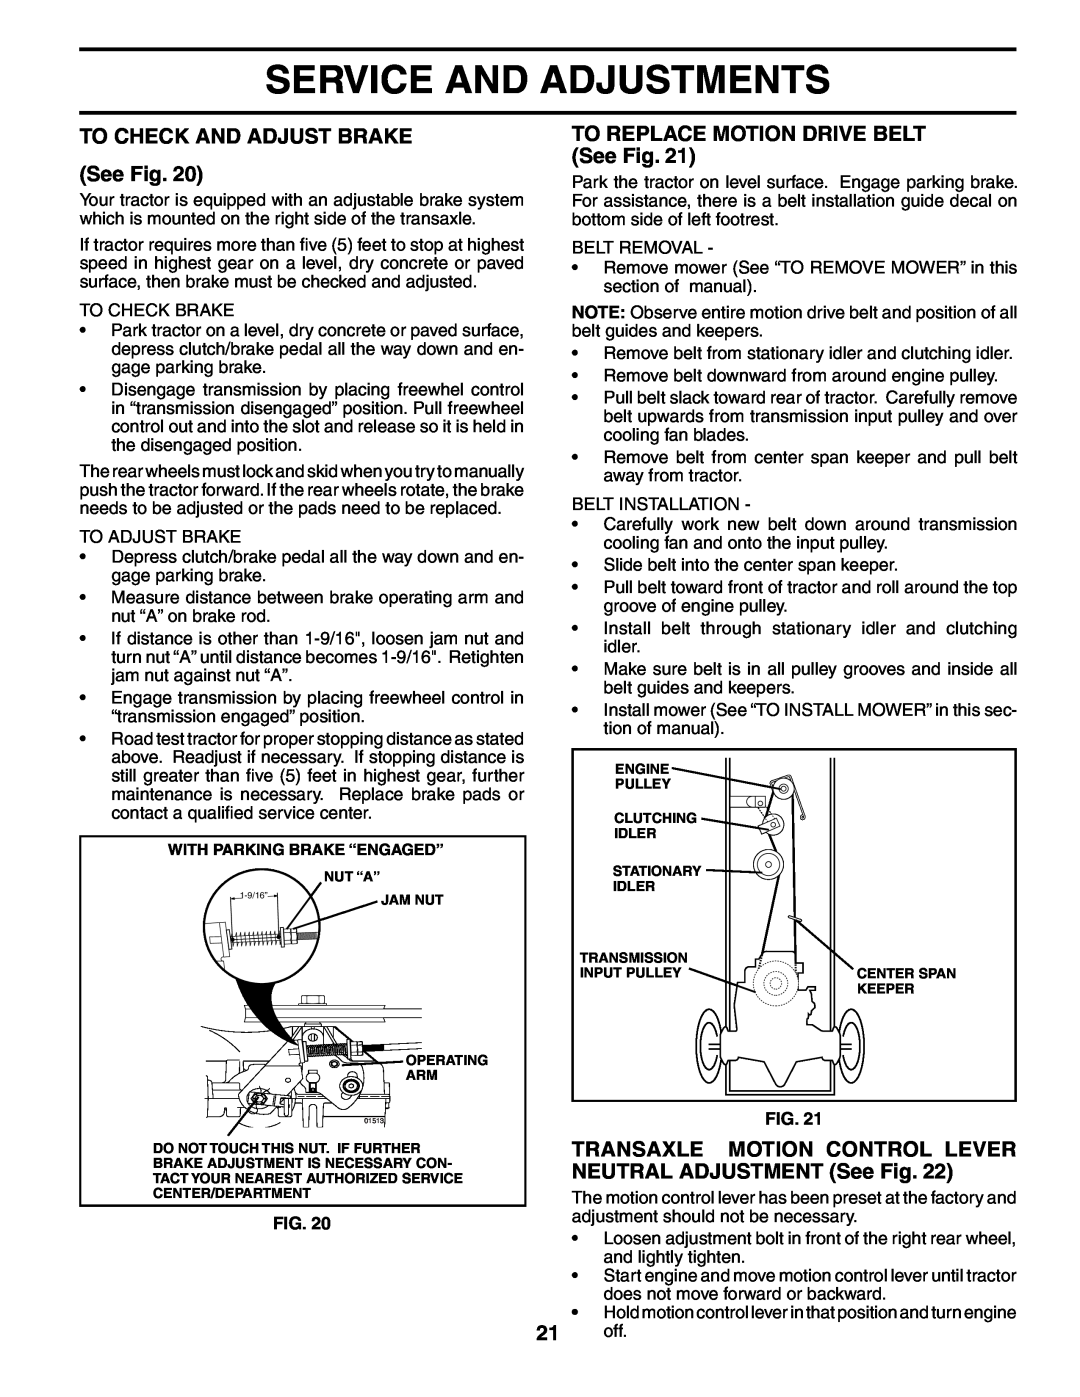 Poulan HD21H42 manual TO CHECK AND ADJUST BRAKE See Fig, TO REPLACE MOTION DRIVE BELT See Fig, Service And Adjustments 